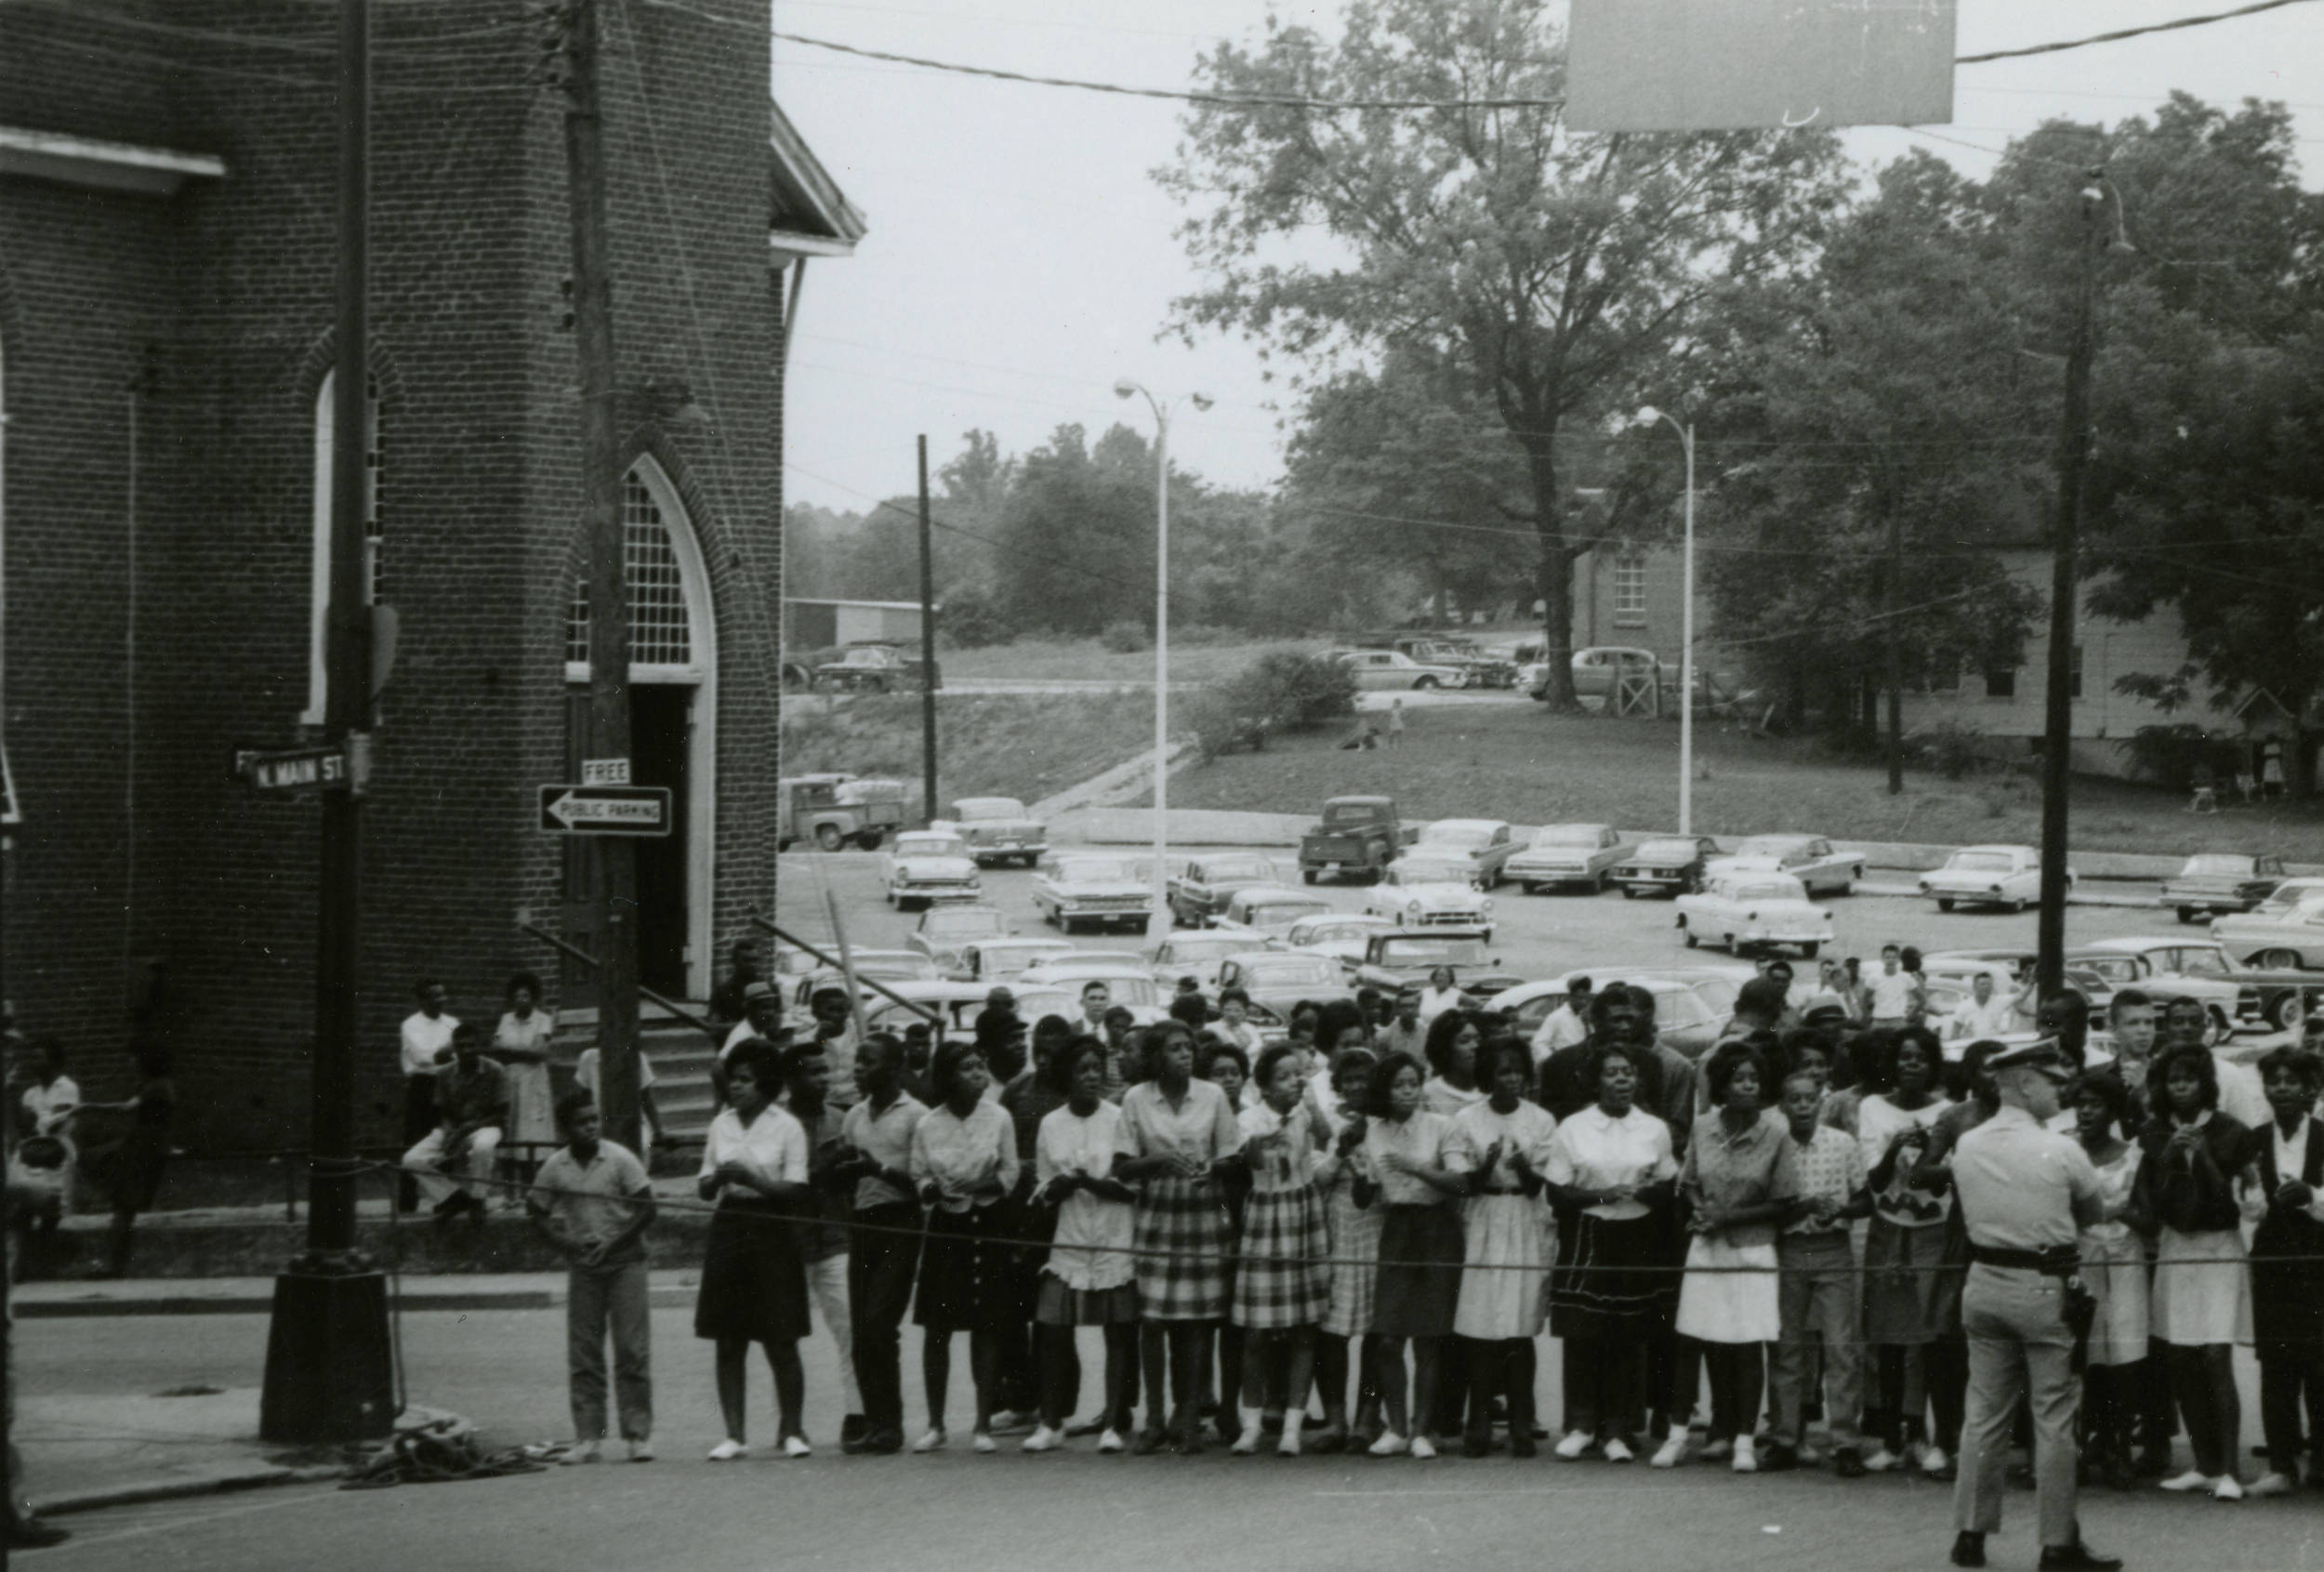 An image of African American students outside of First Baptist Church, with law enforcement officers present